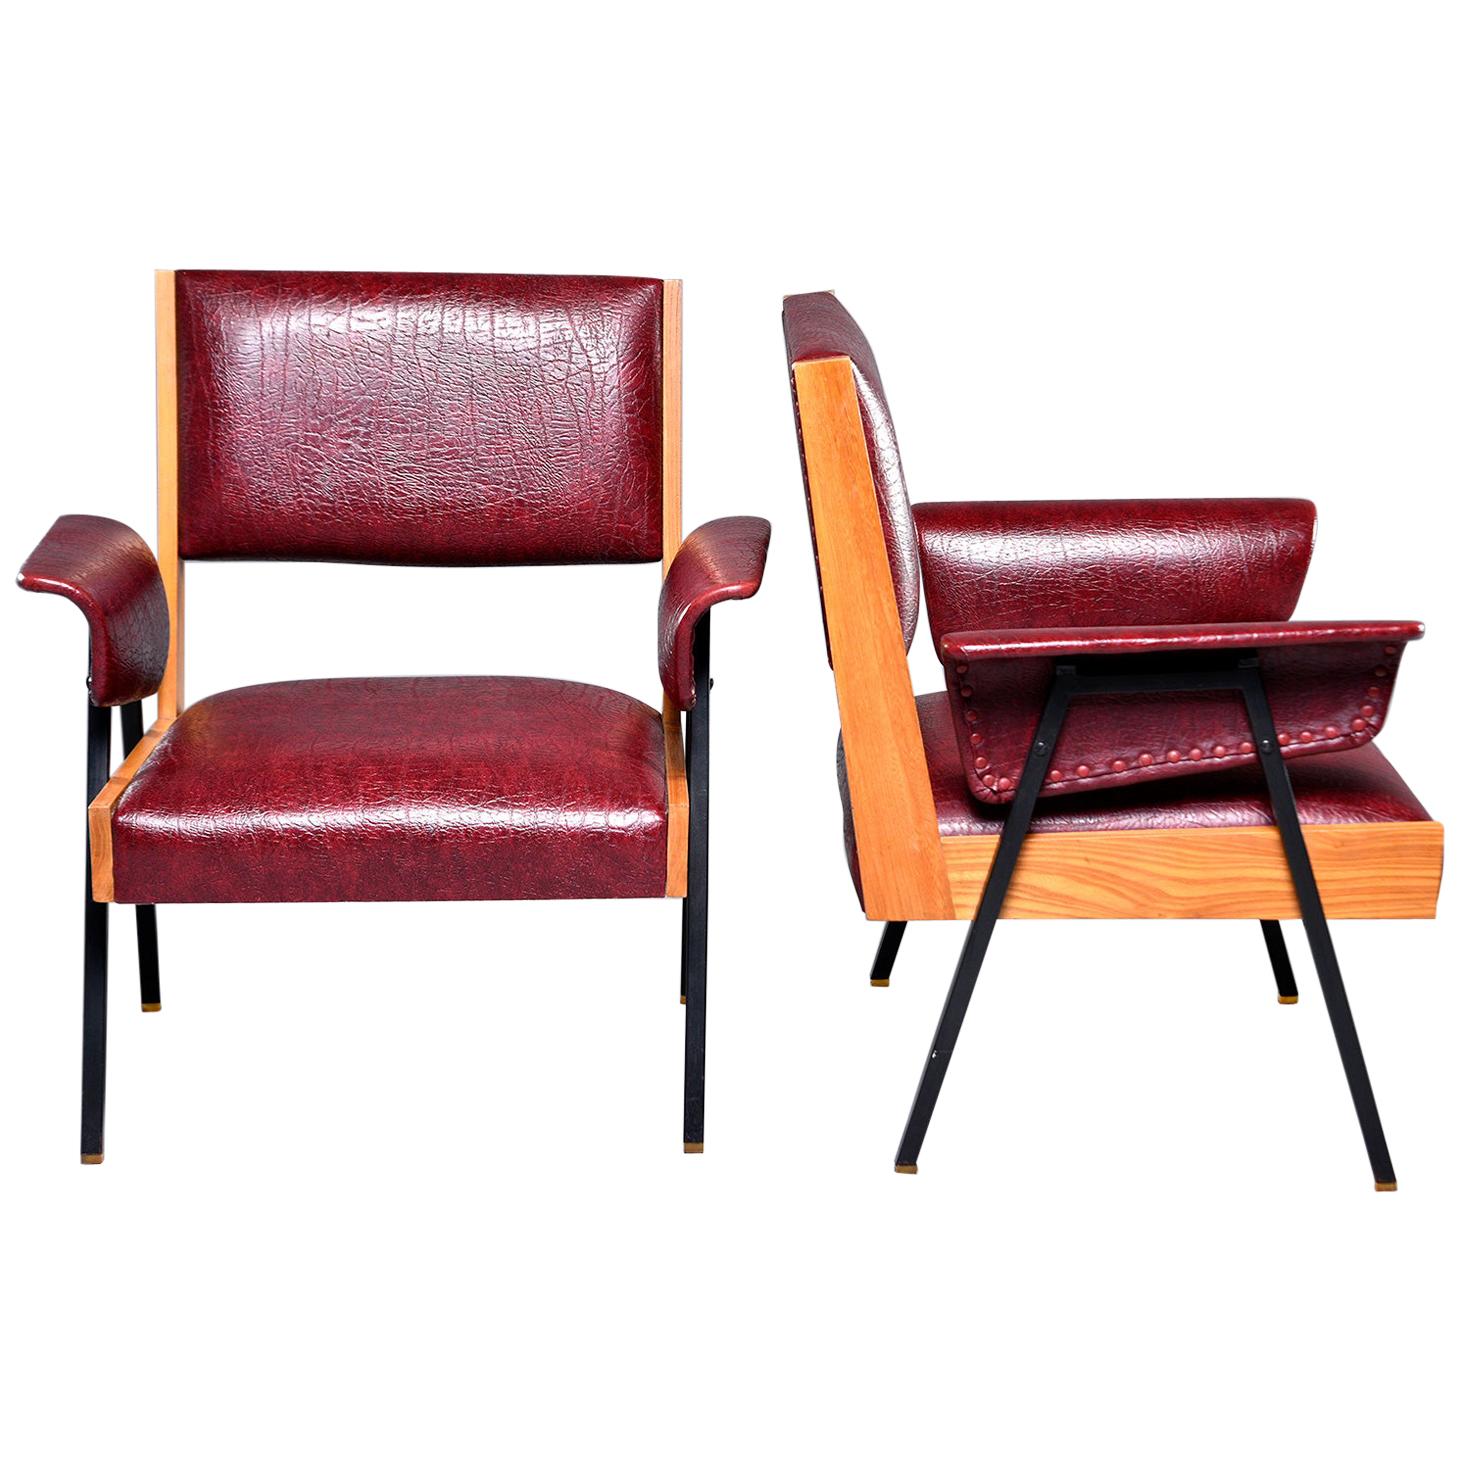 Pair of Midcentury Armchairs with Wood Frames and Metal Legs